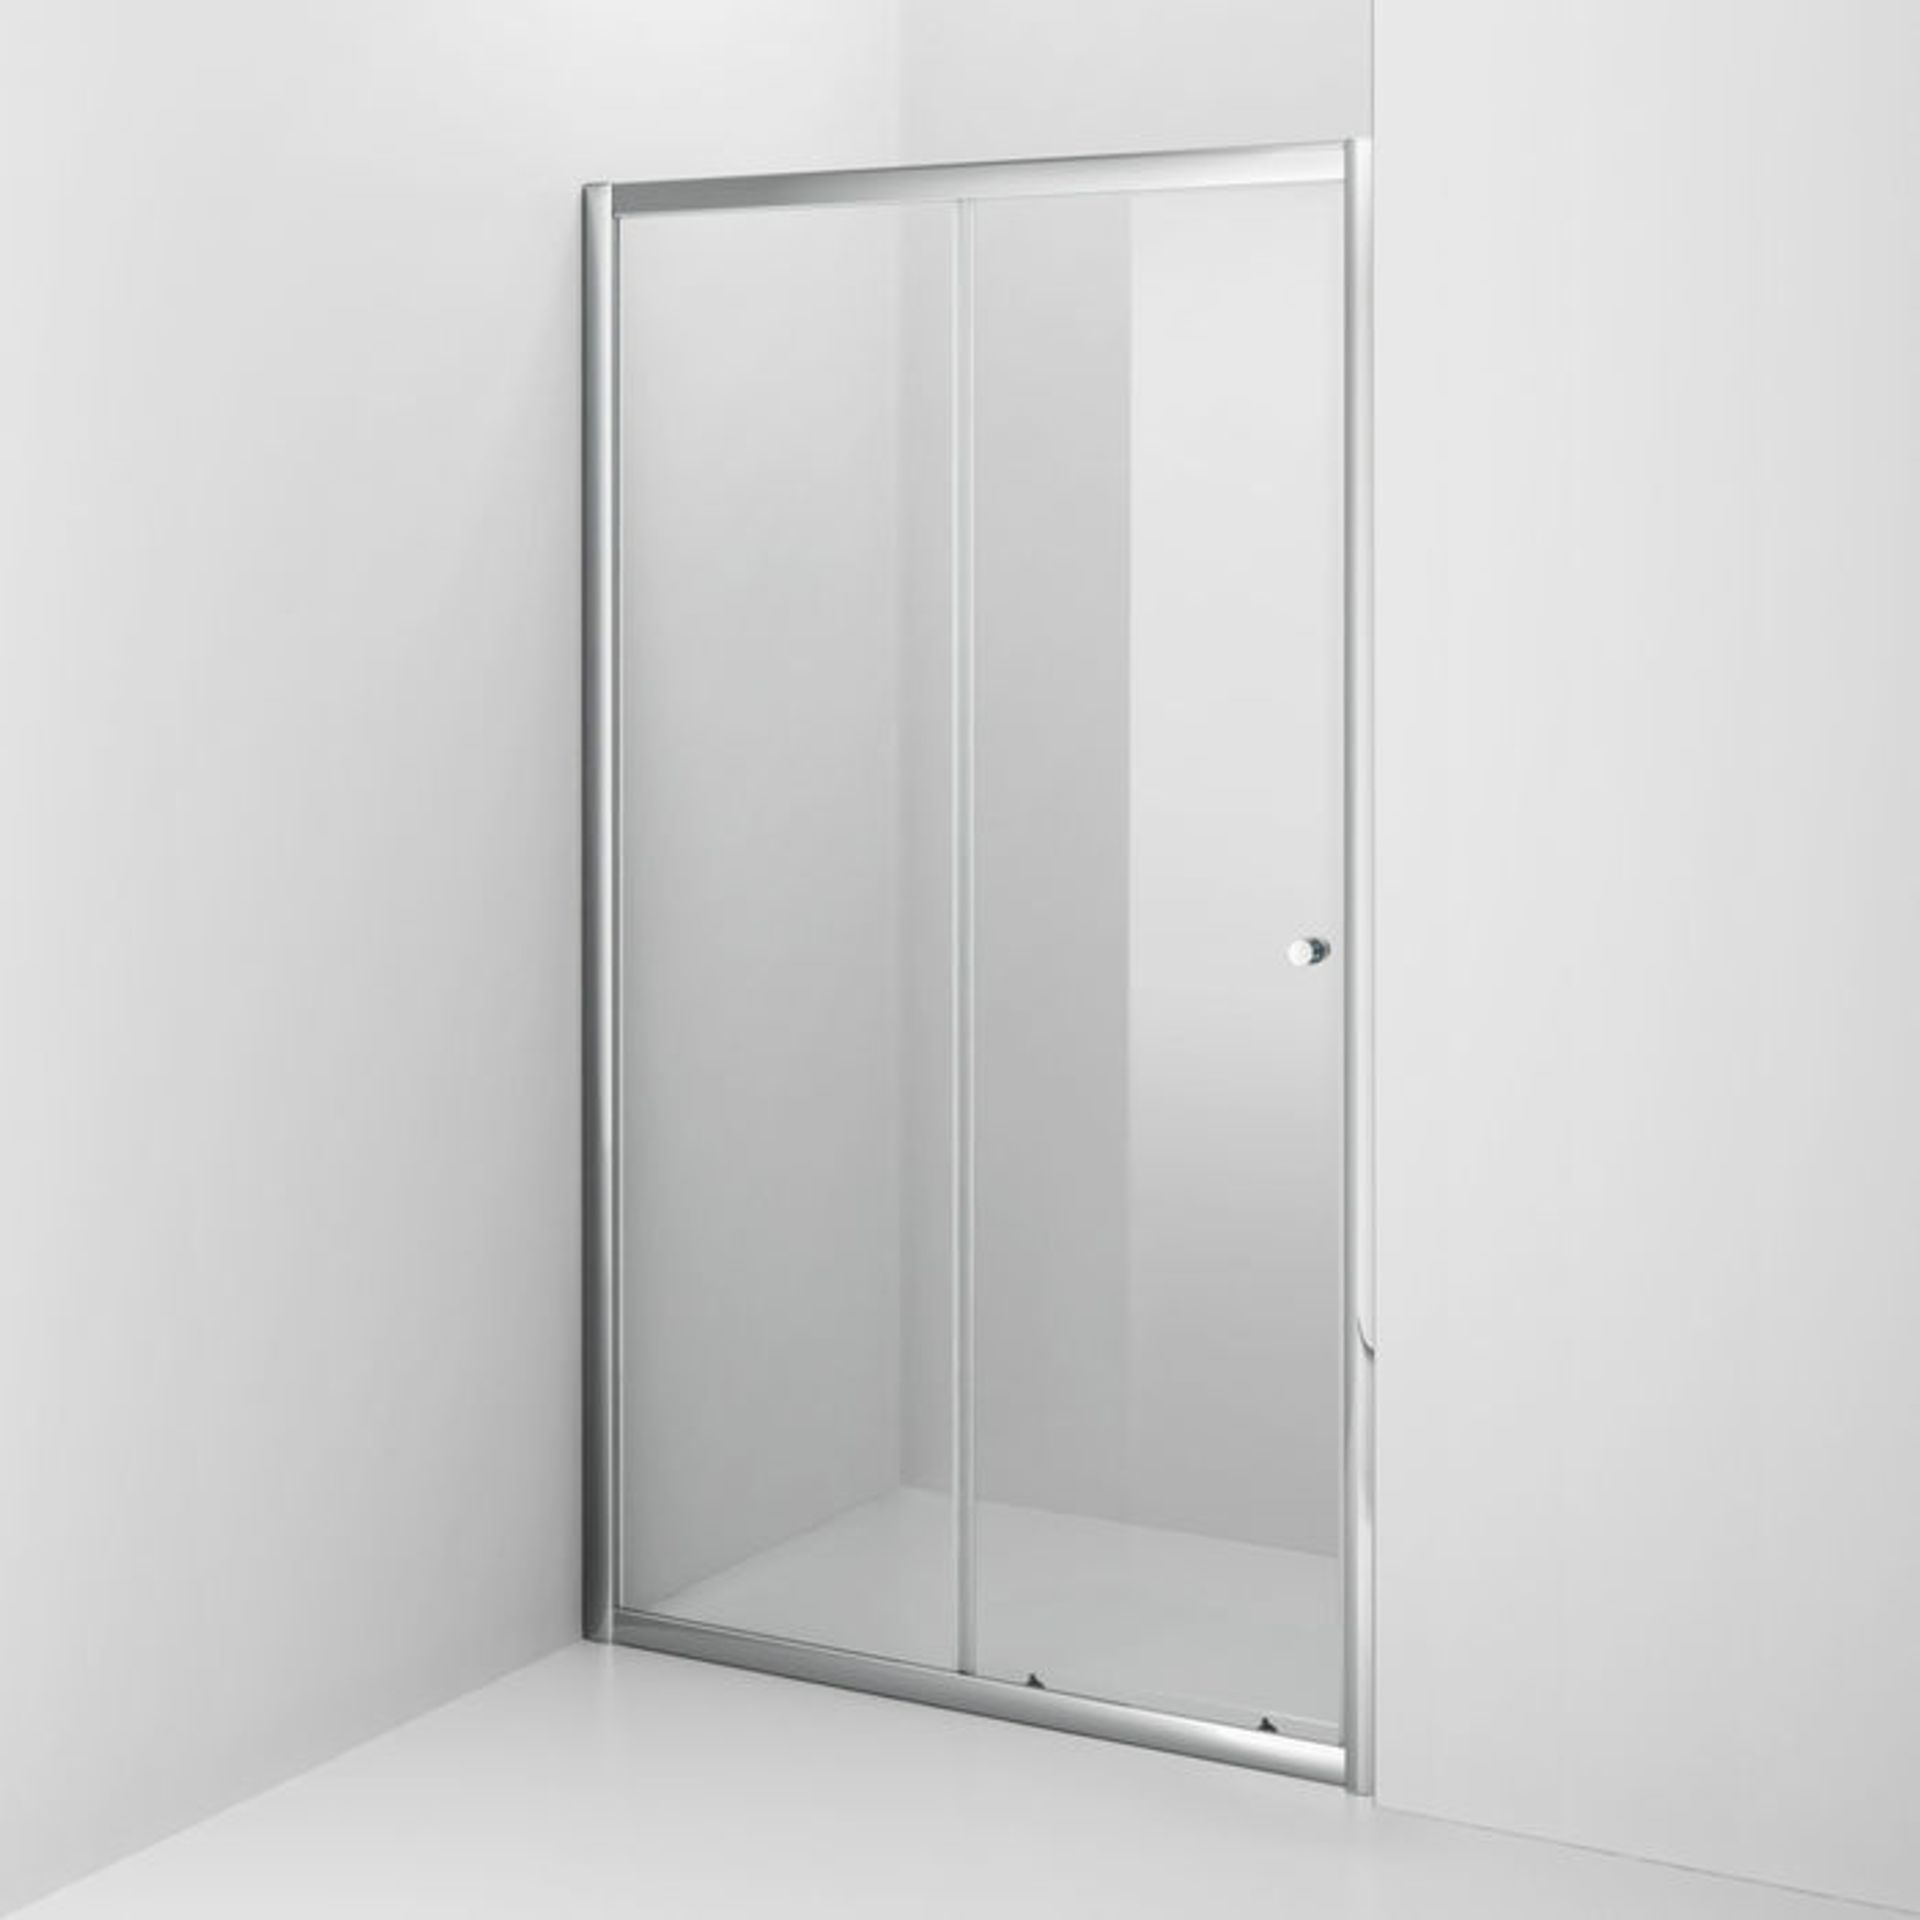 (PA148) 1200mm - Elements Sliding Shower Door. RRP £299.99. 4mm Safety Glass Fully waterproof tested - Image 3 of 3